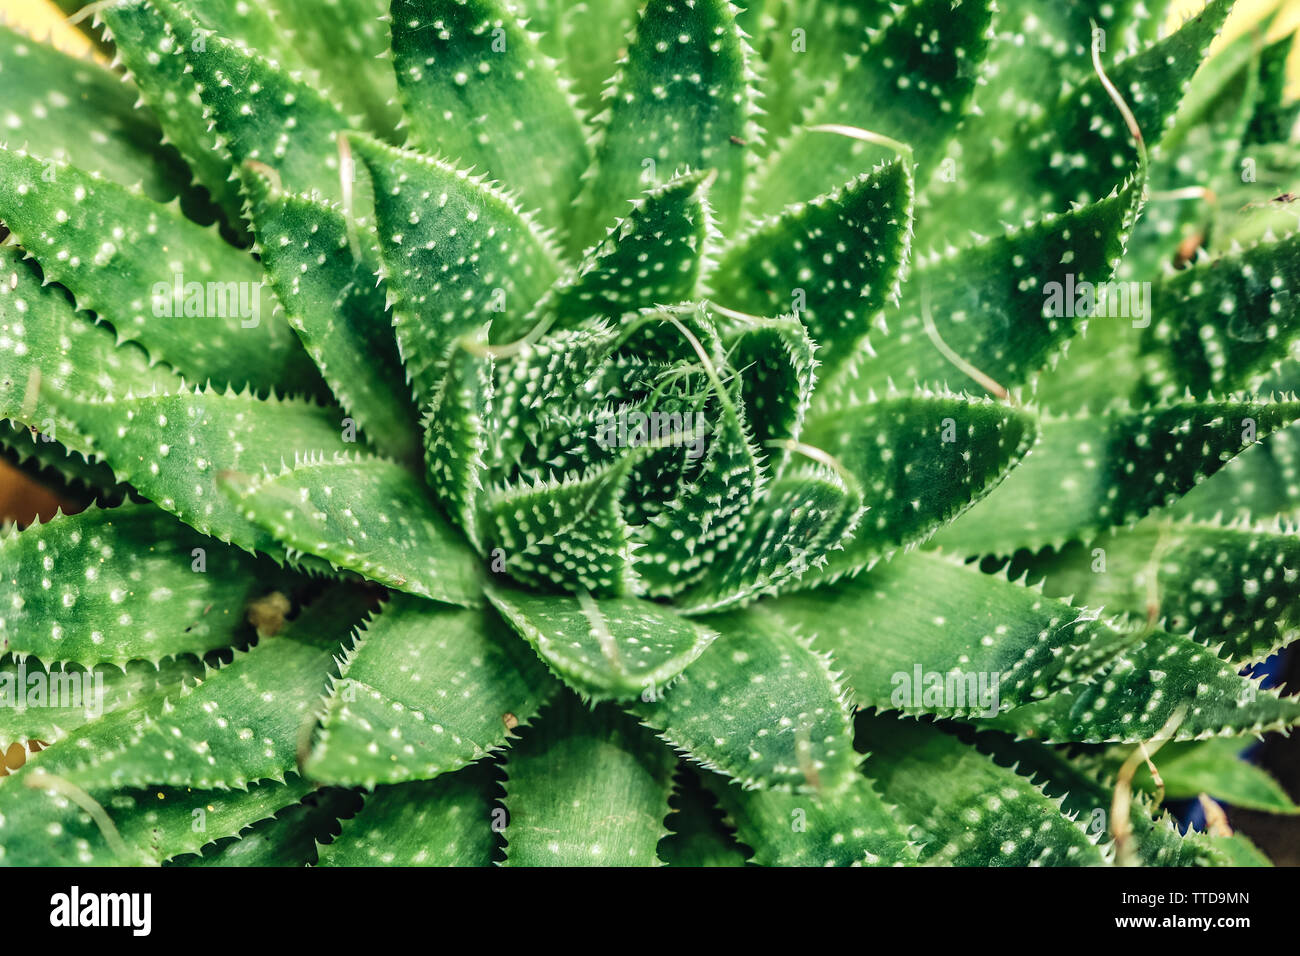 Sharp bloom of the young cactus. Stock Photo